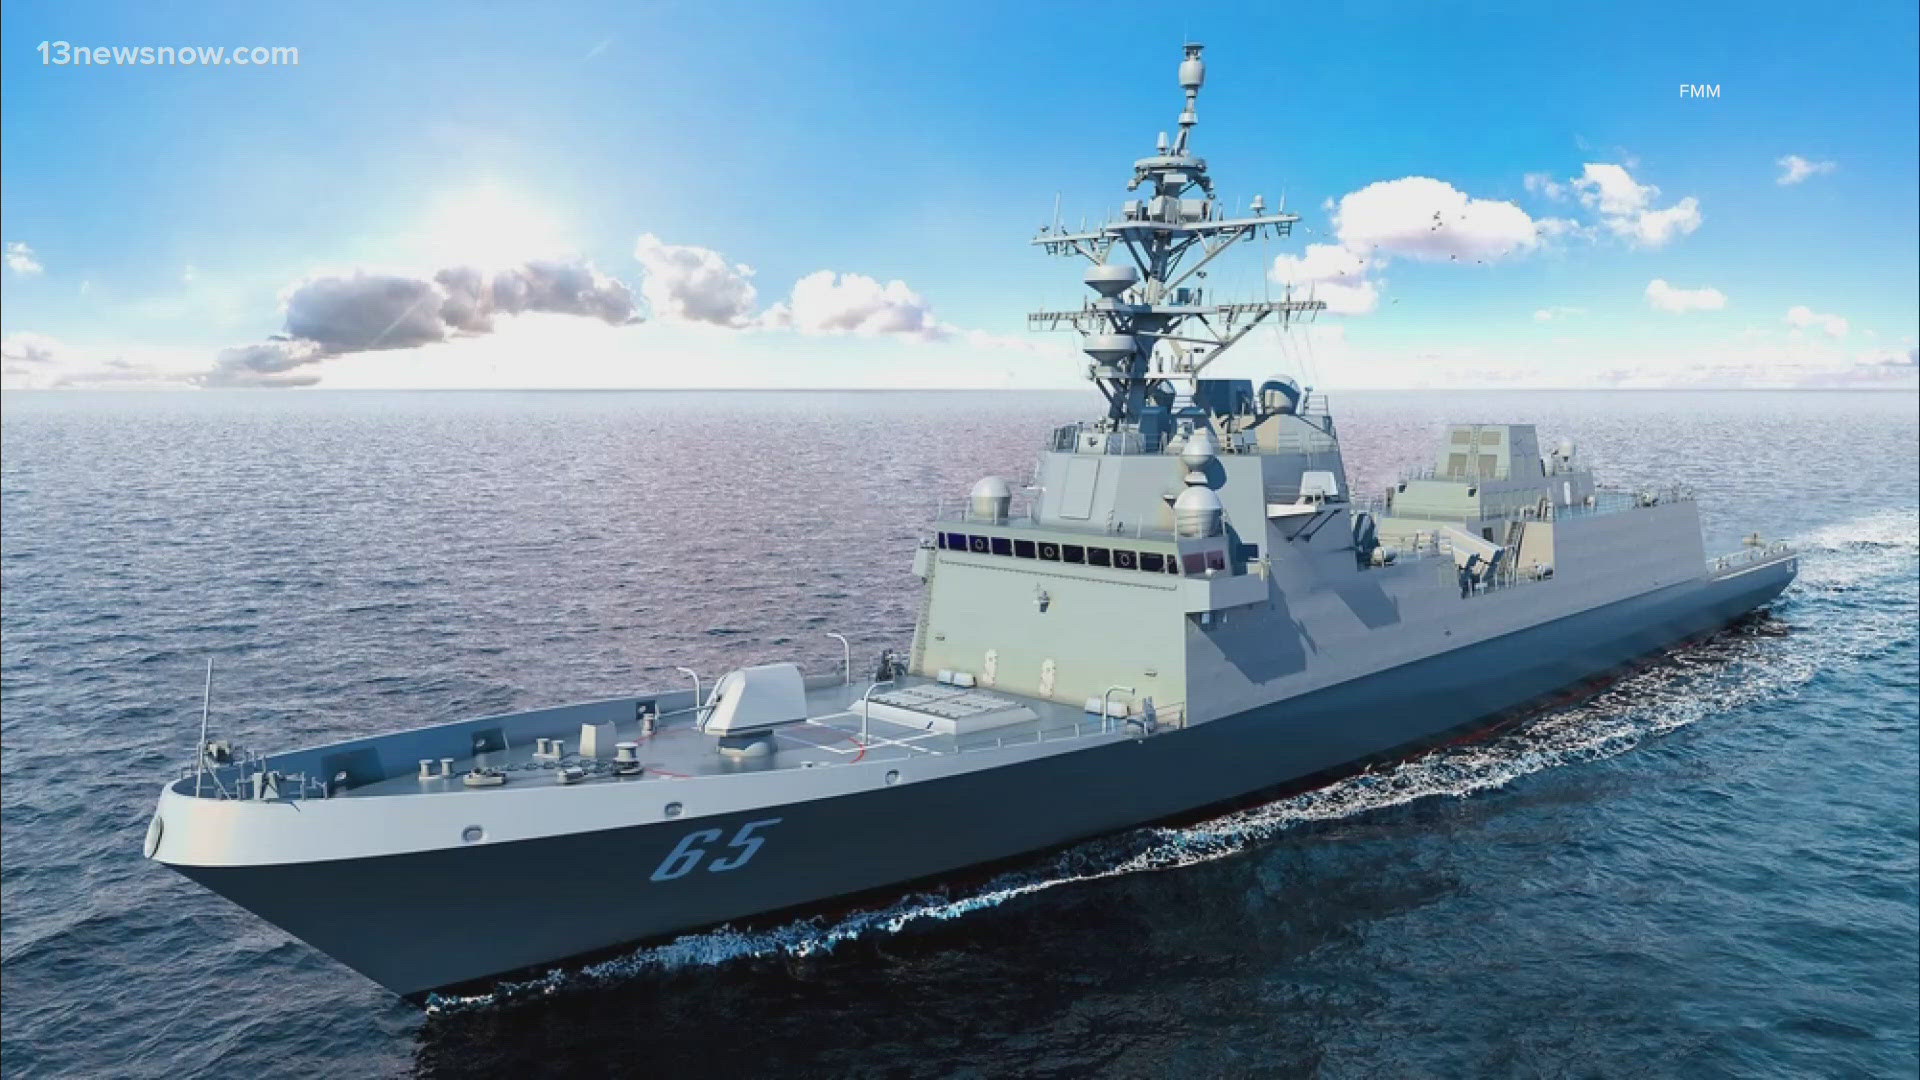 The Navy's "next generation small surface combatant" has been plagued by "botched metrics" and "inadequate" review practices.